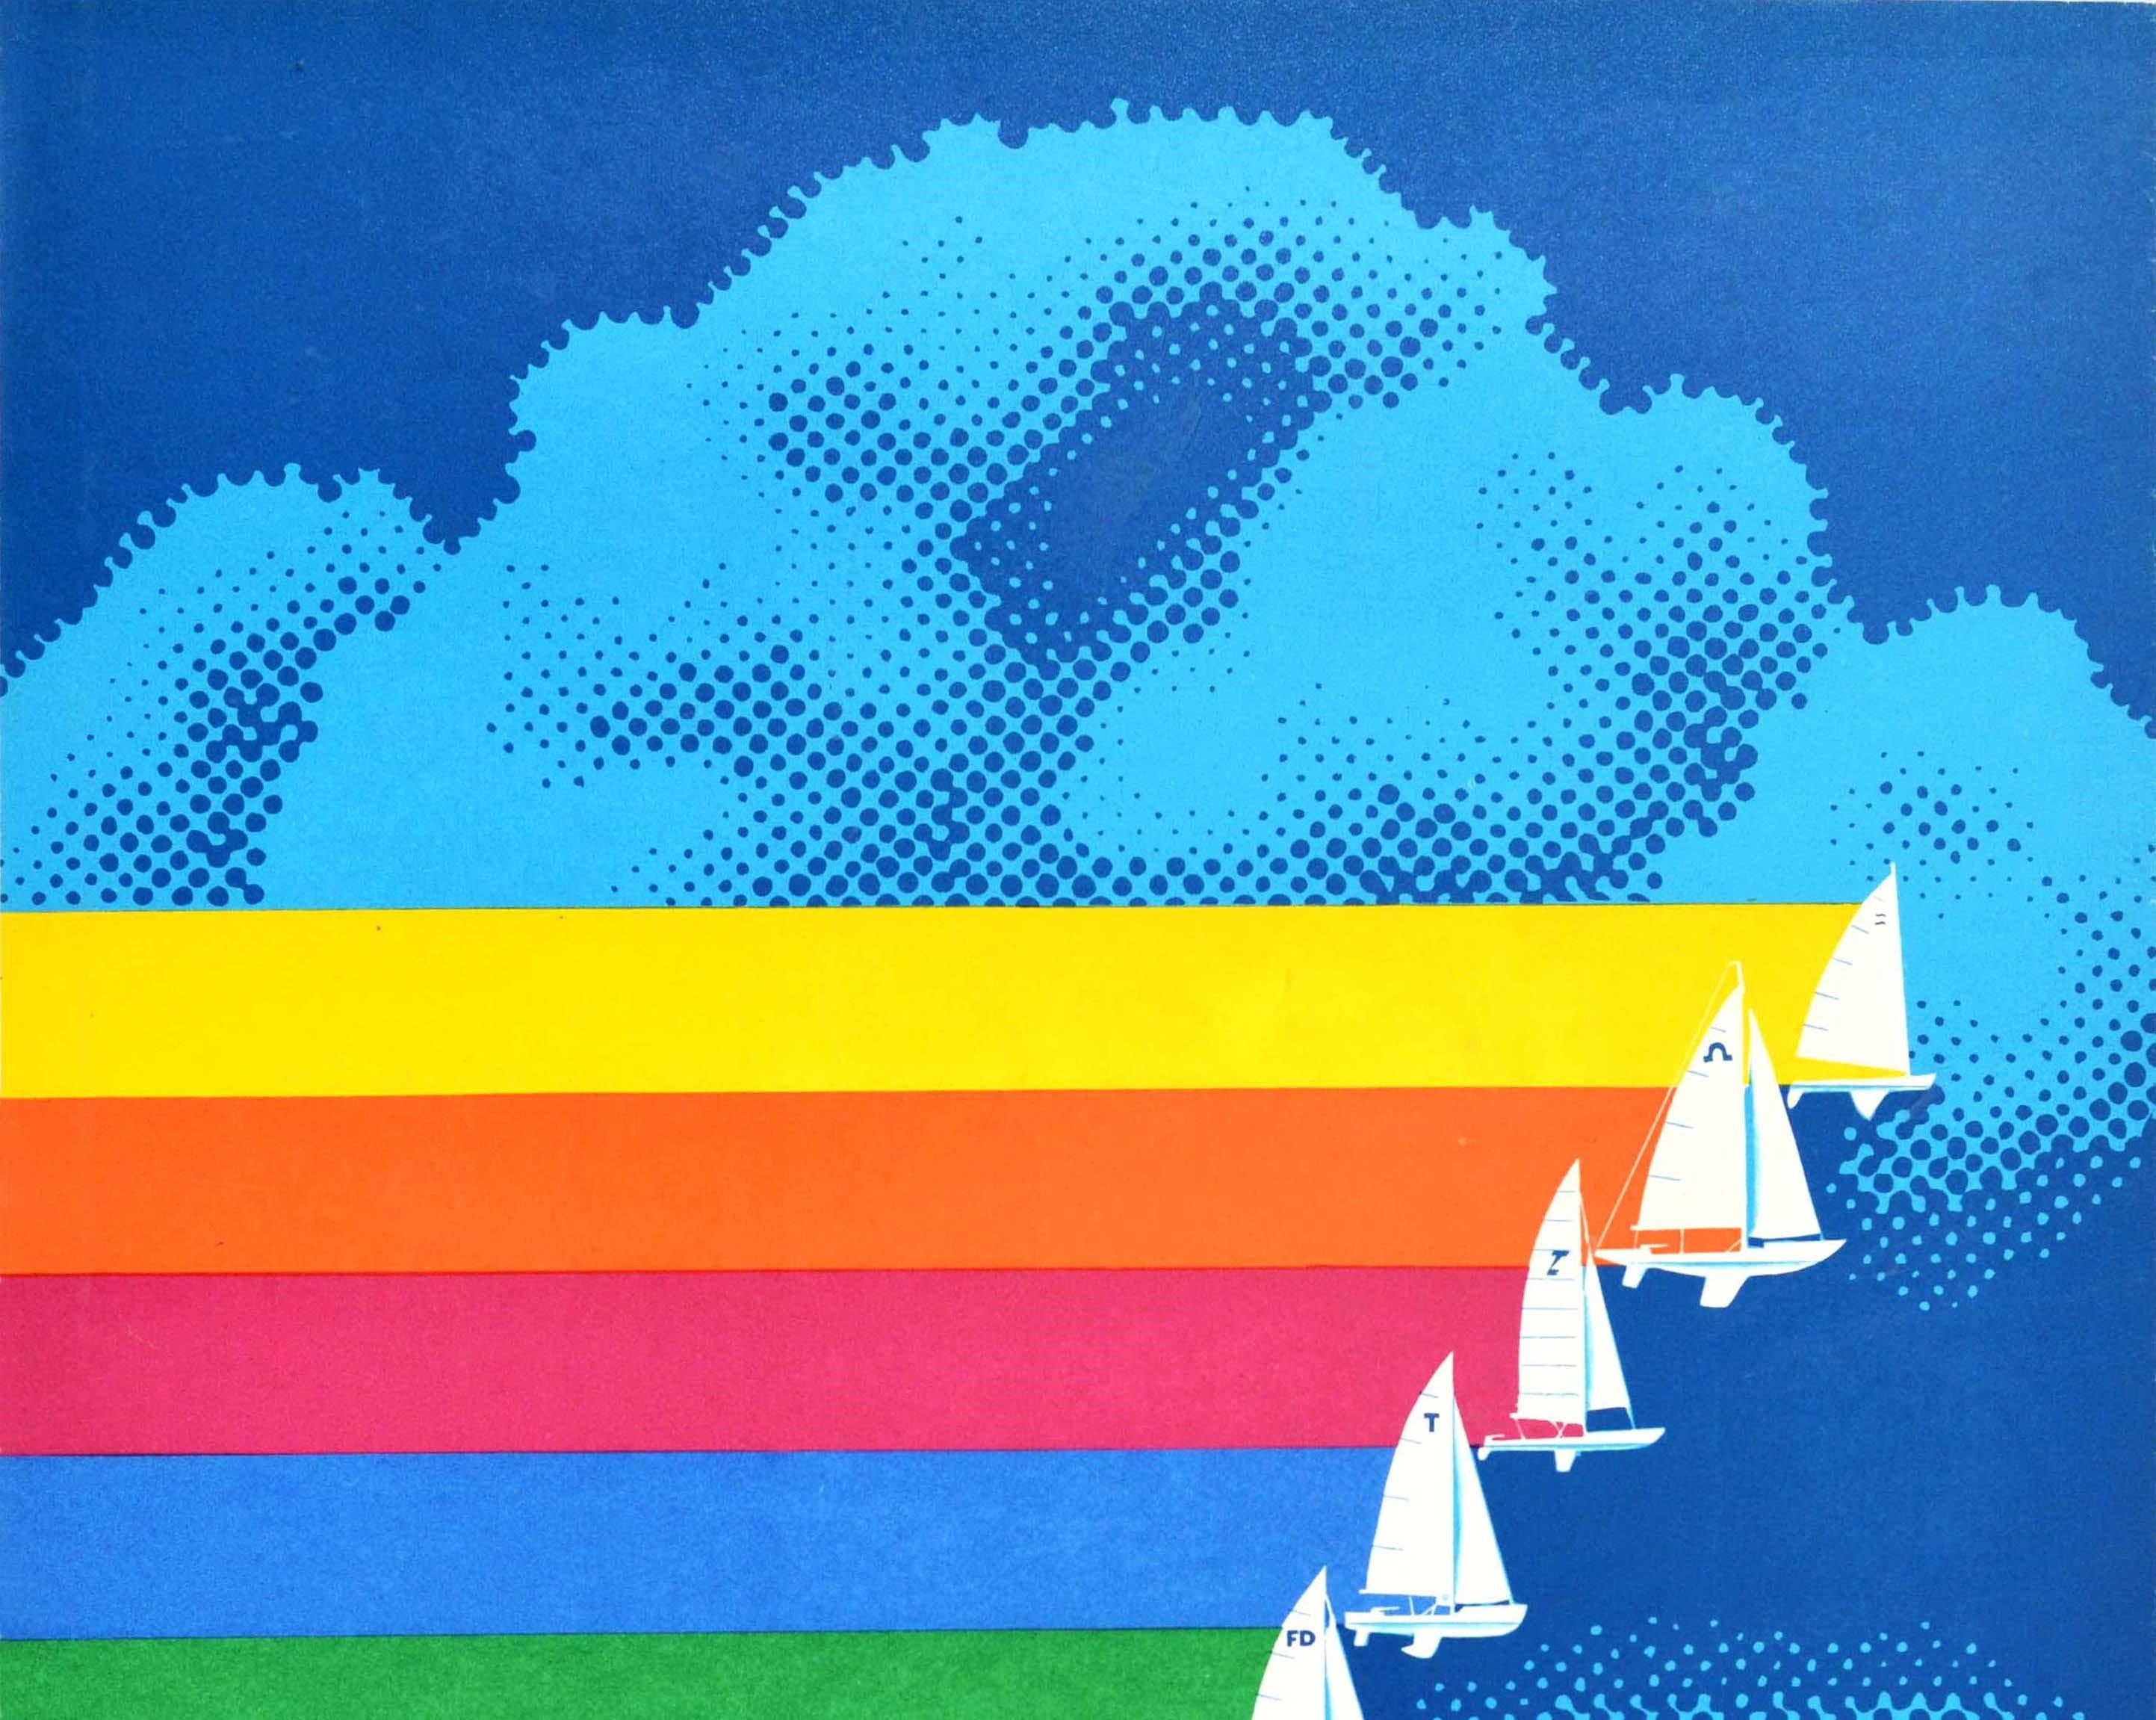 Original vintage Soviet sports poster for the sailing events of the 22nd Summer Olympic Games / Games of the XXII Olympiad hosted by Moscow Russia and held from 21-29 July at the Pirita Olympic Yachting Centre in Tallinn on the Baltic Sea coast -